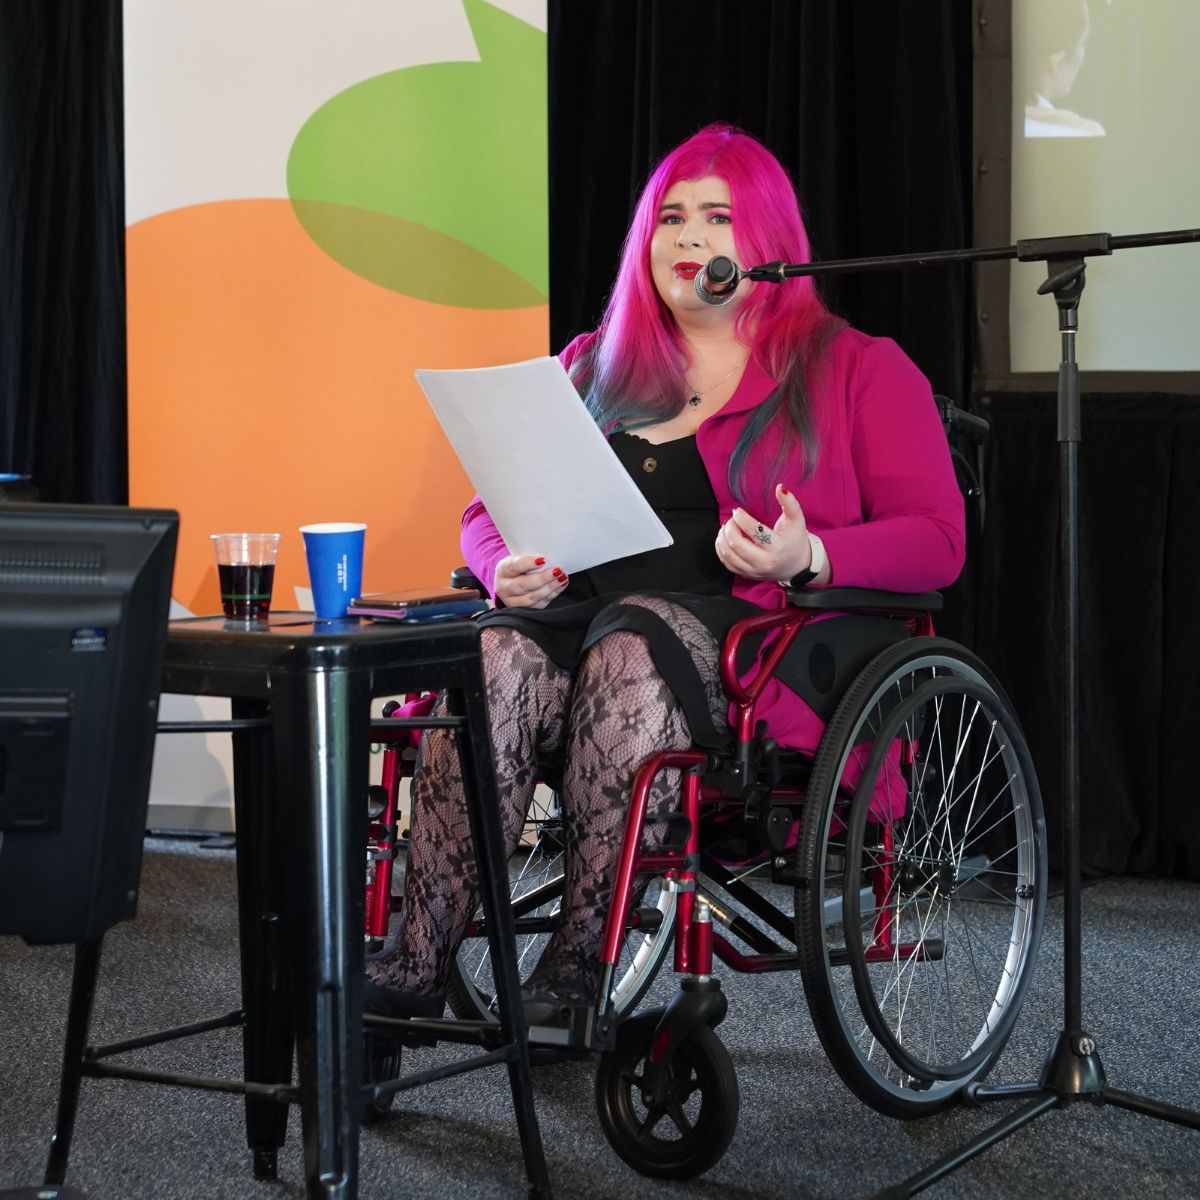 A young woman with bright pink hair, lipstick and jacket. She is on a stage, holding a paper and speaking into a microphone. There is signage behind her with CYDA branding on it. She is using a manual wheelchair.